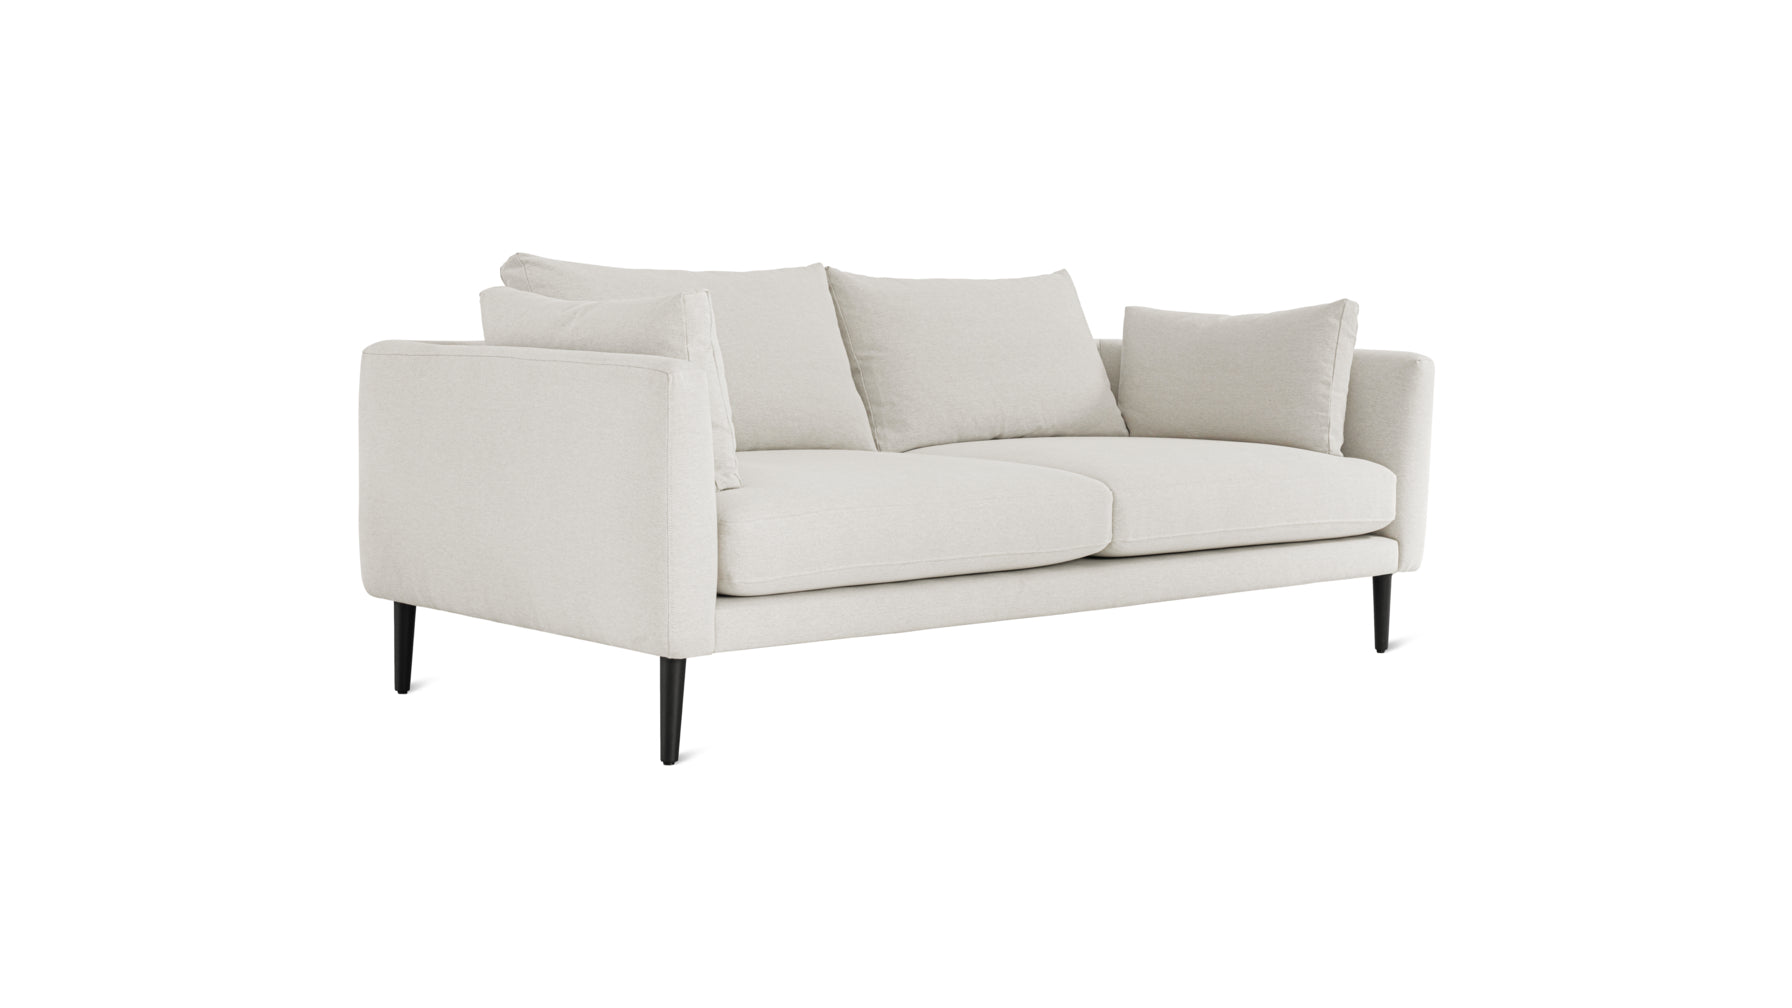 Stay A While Sofa, 3+ Seater, Coconut - Image 3